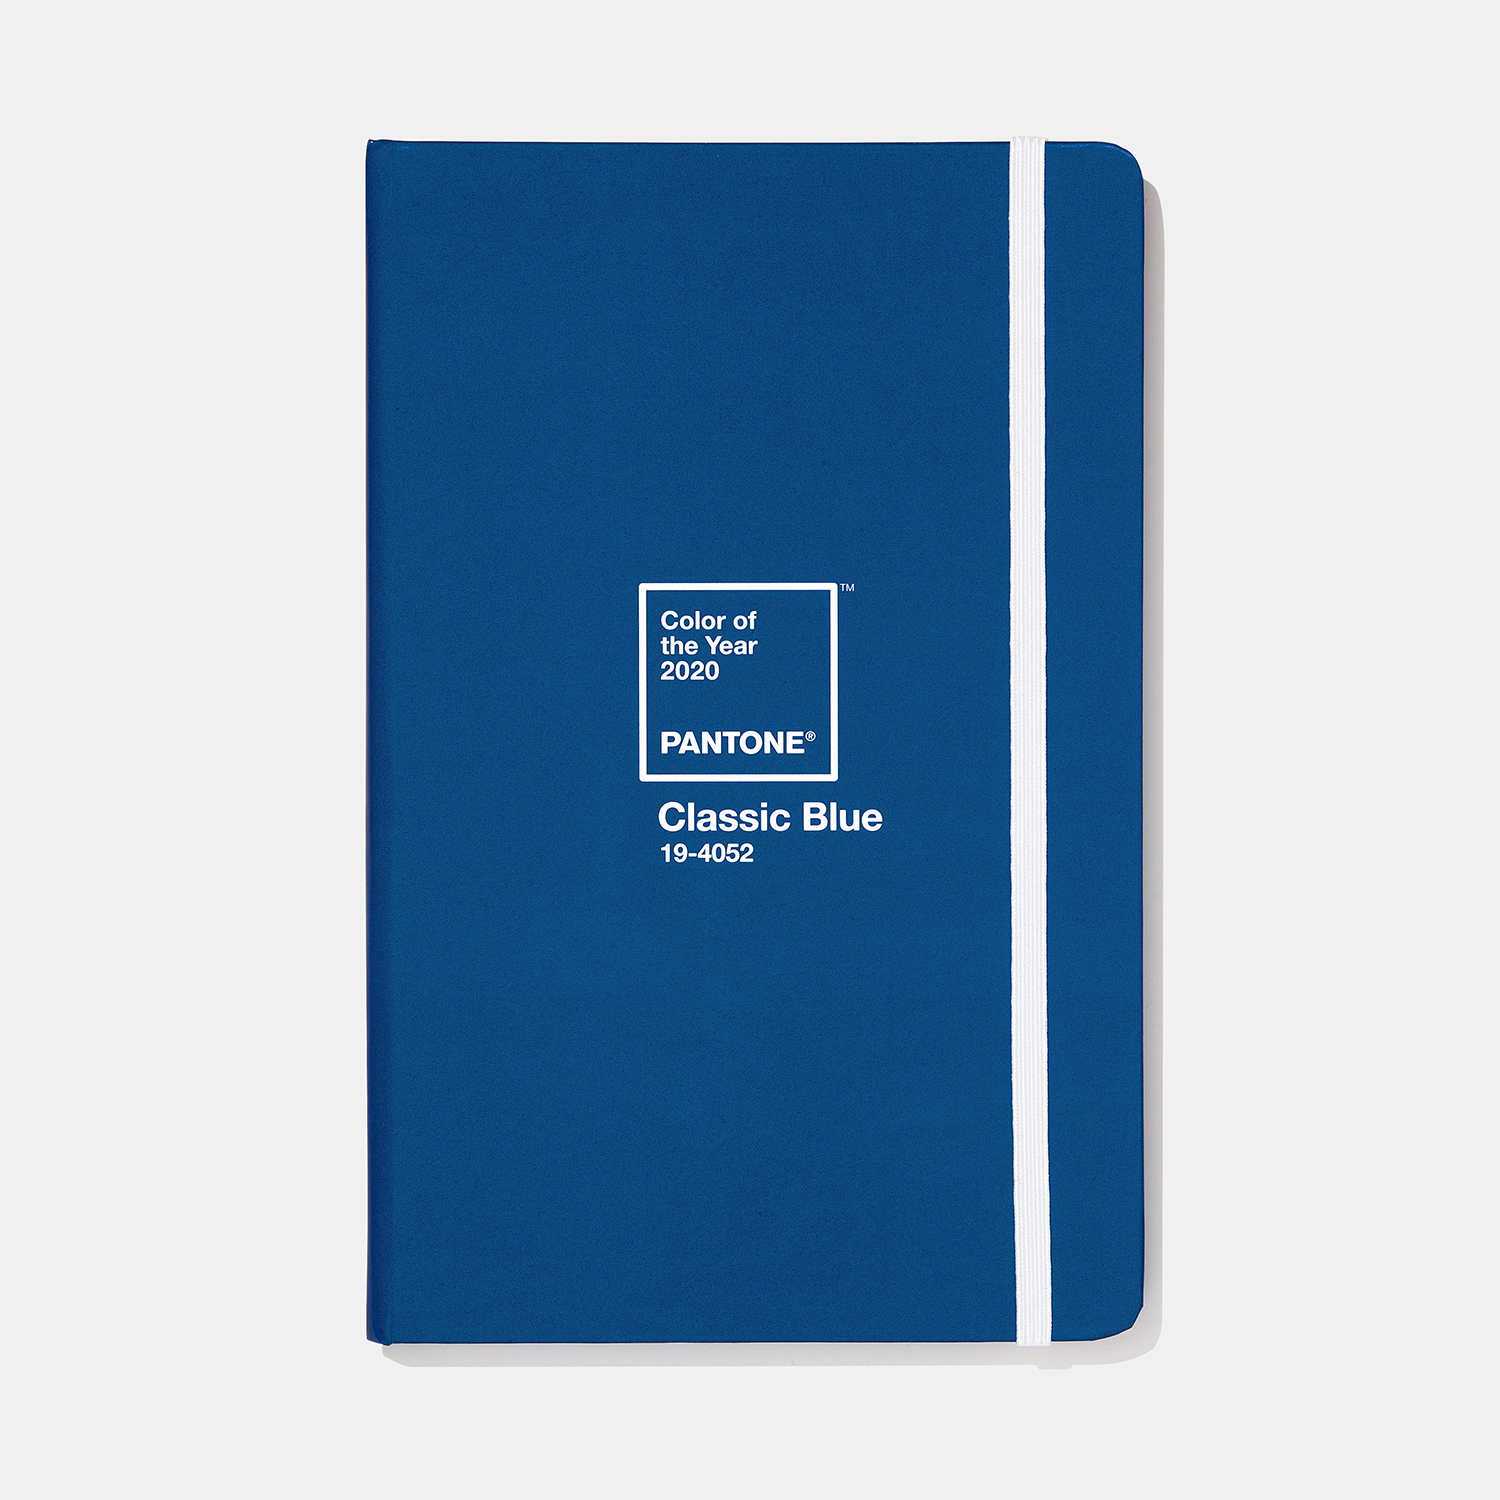 Pantone Limited Edition Journal, Pantone Color of the Year 2020 Classic Blue - View 1